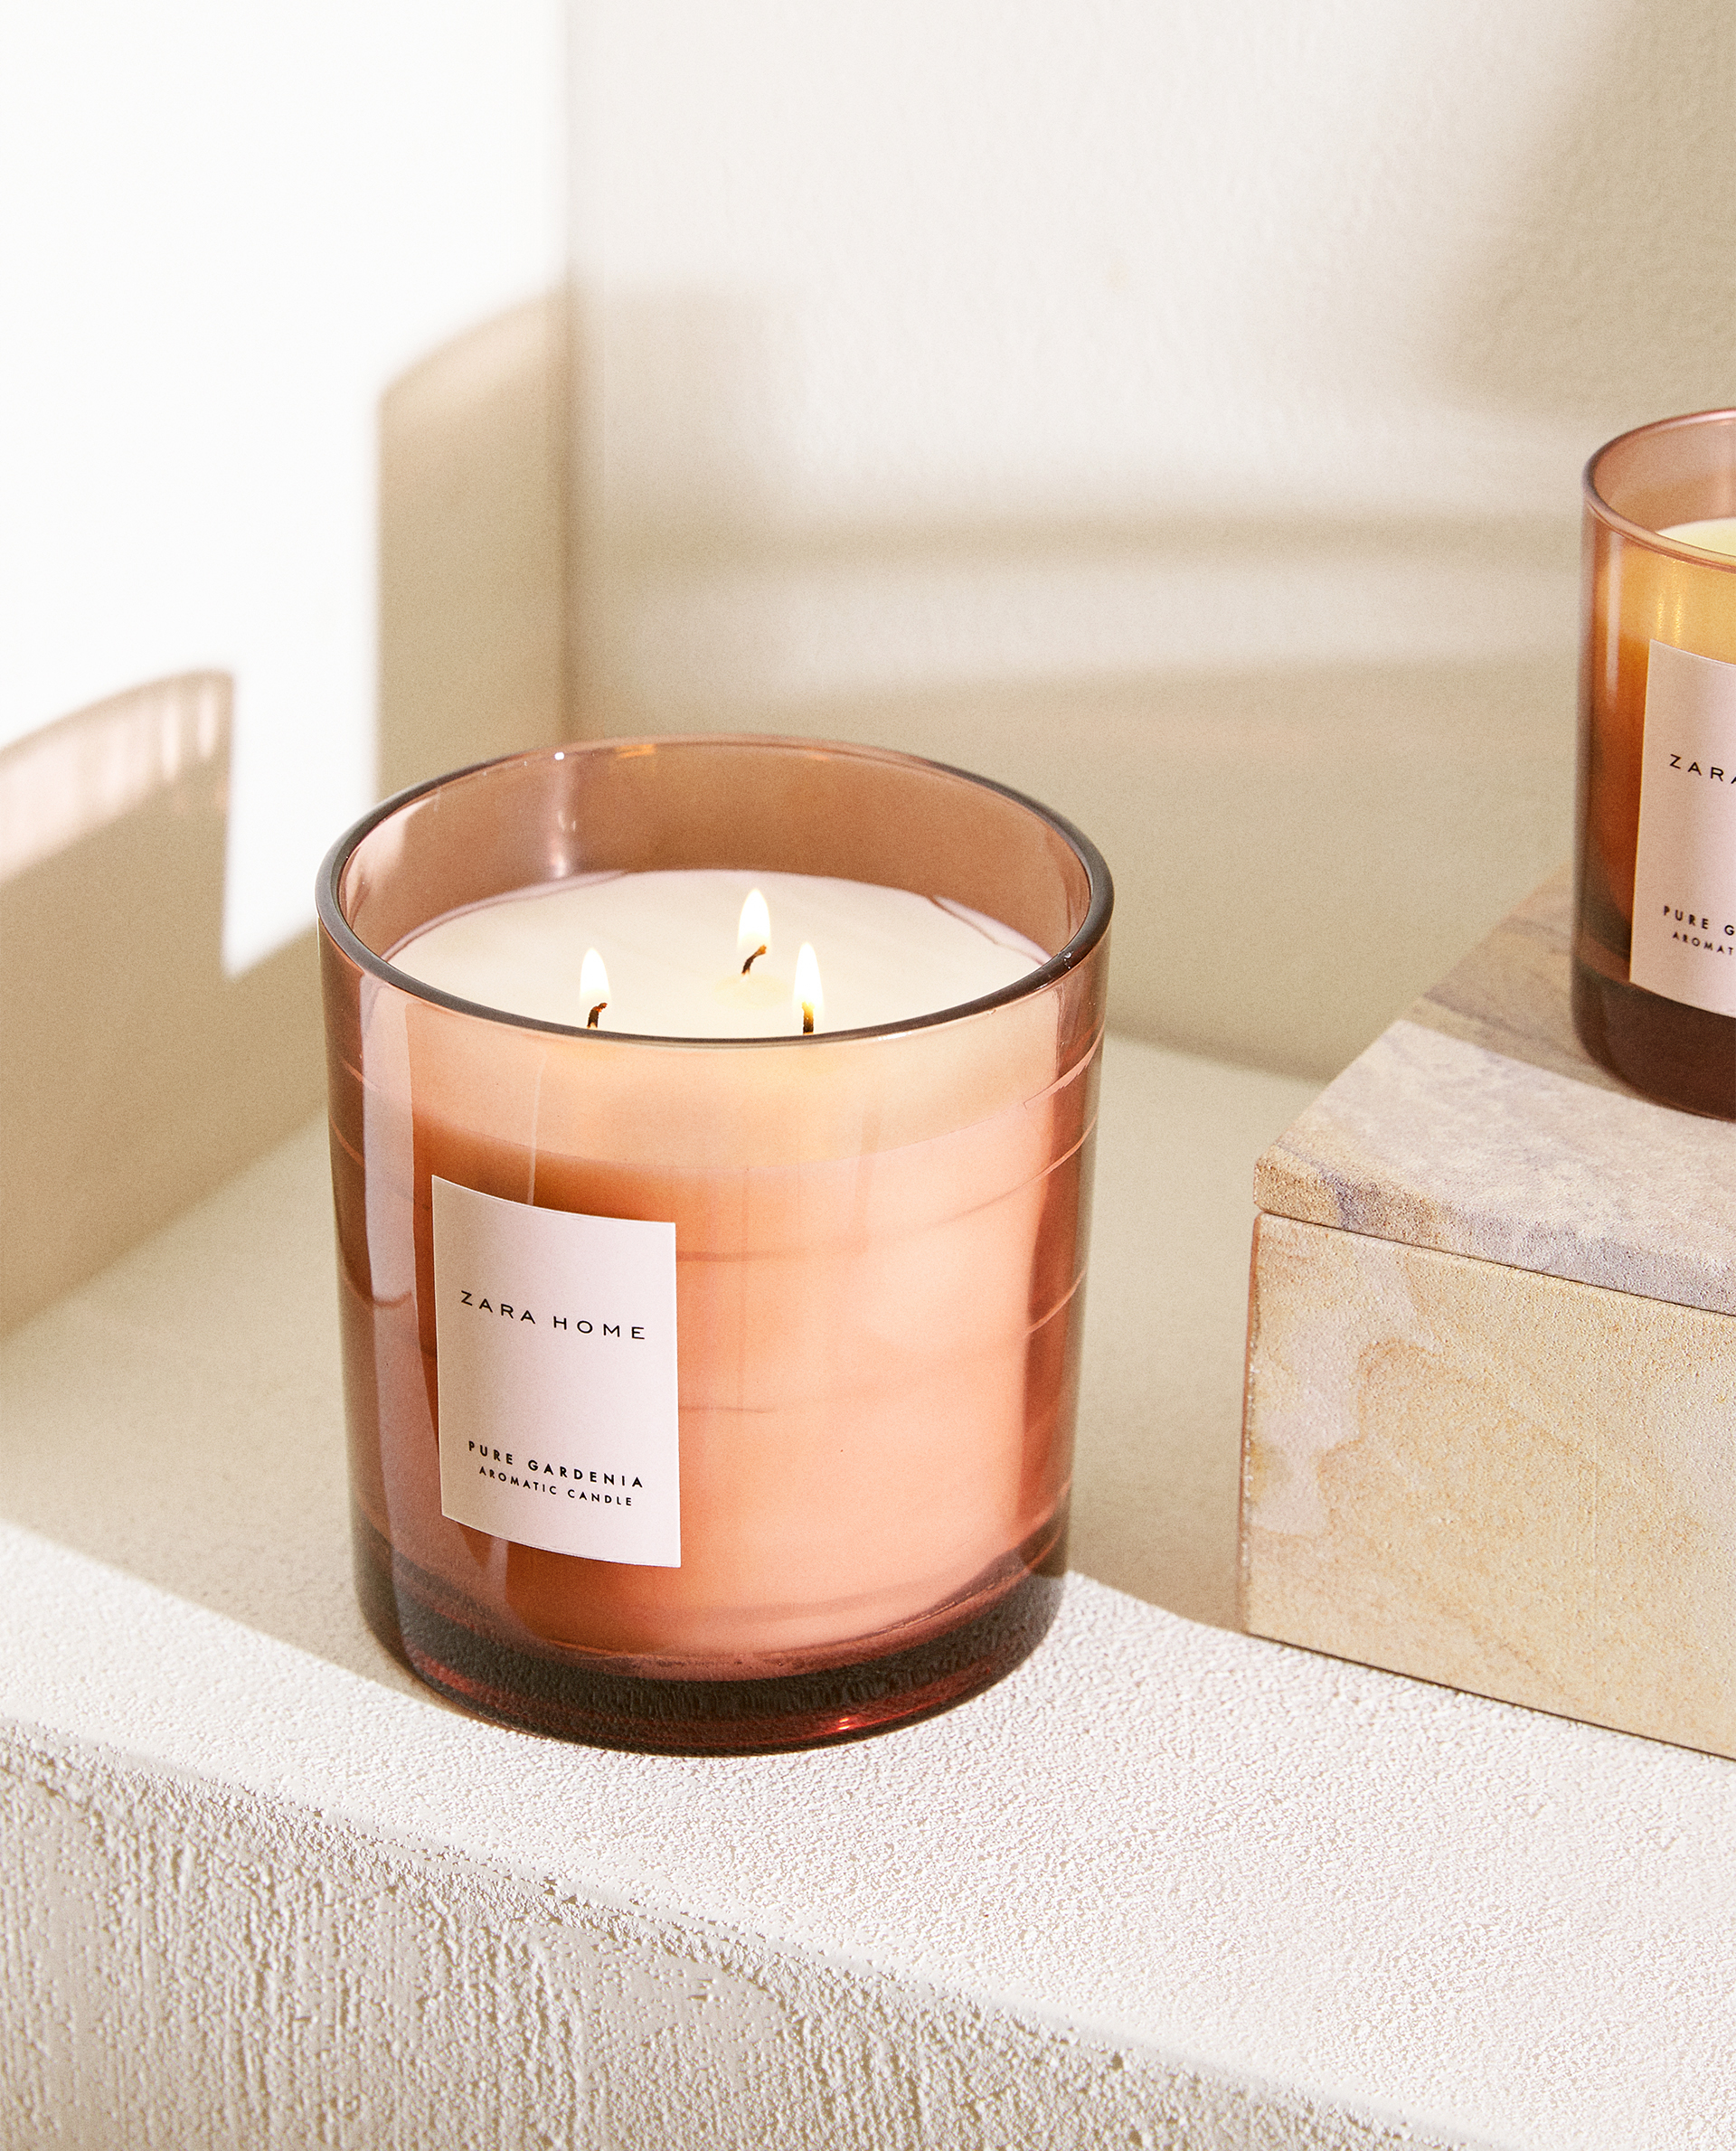 zara home scented candles